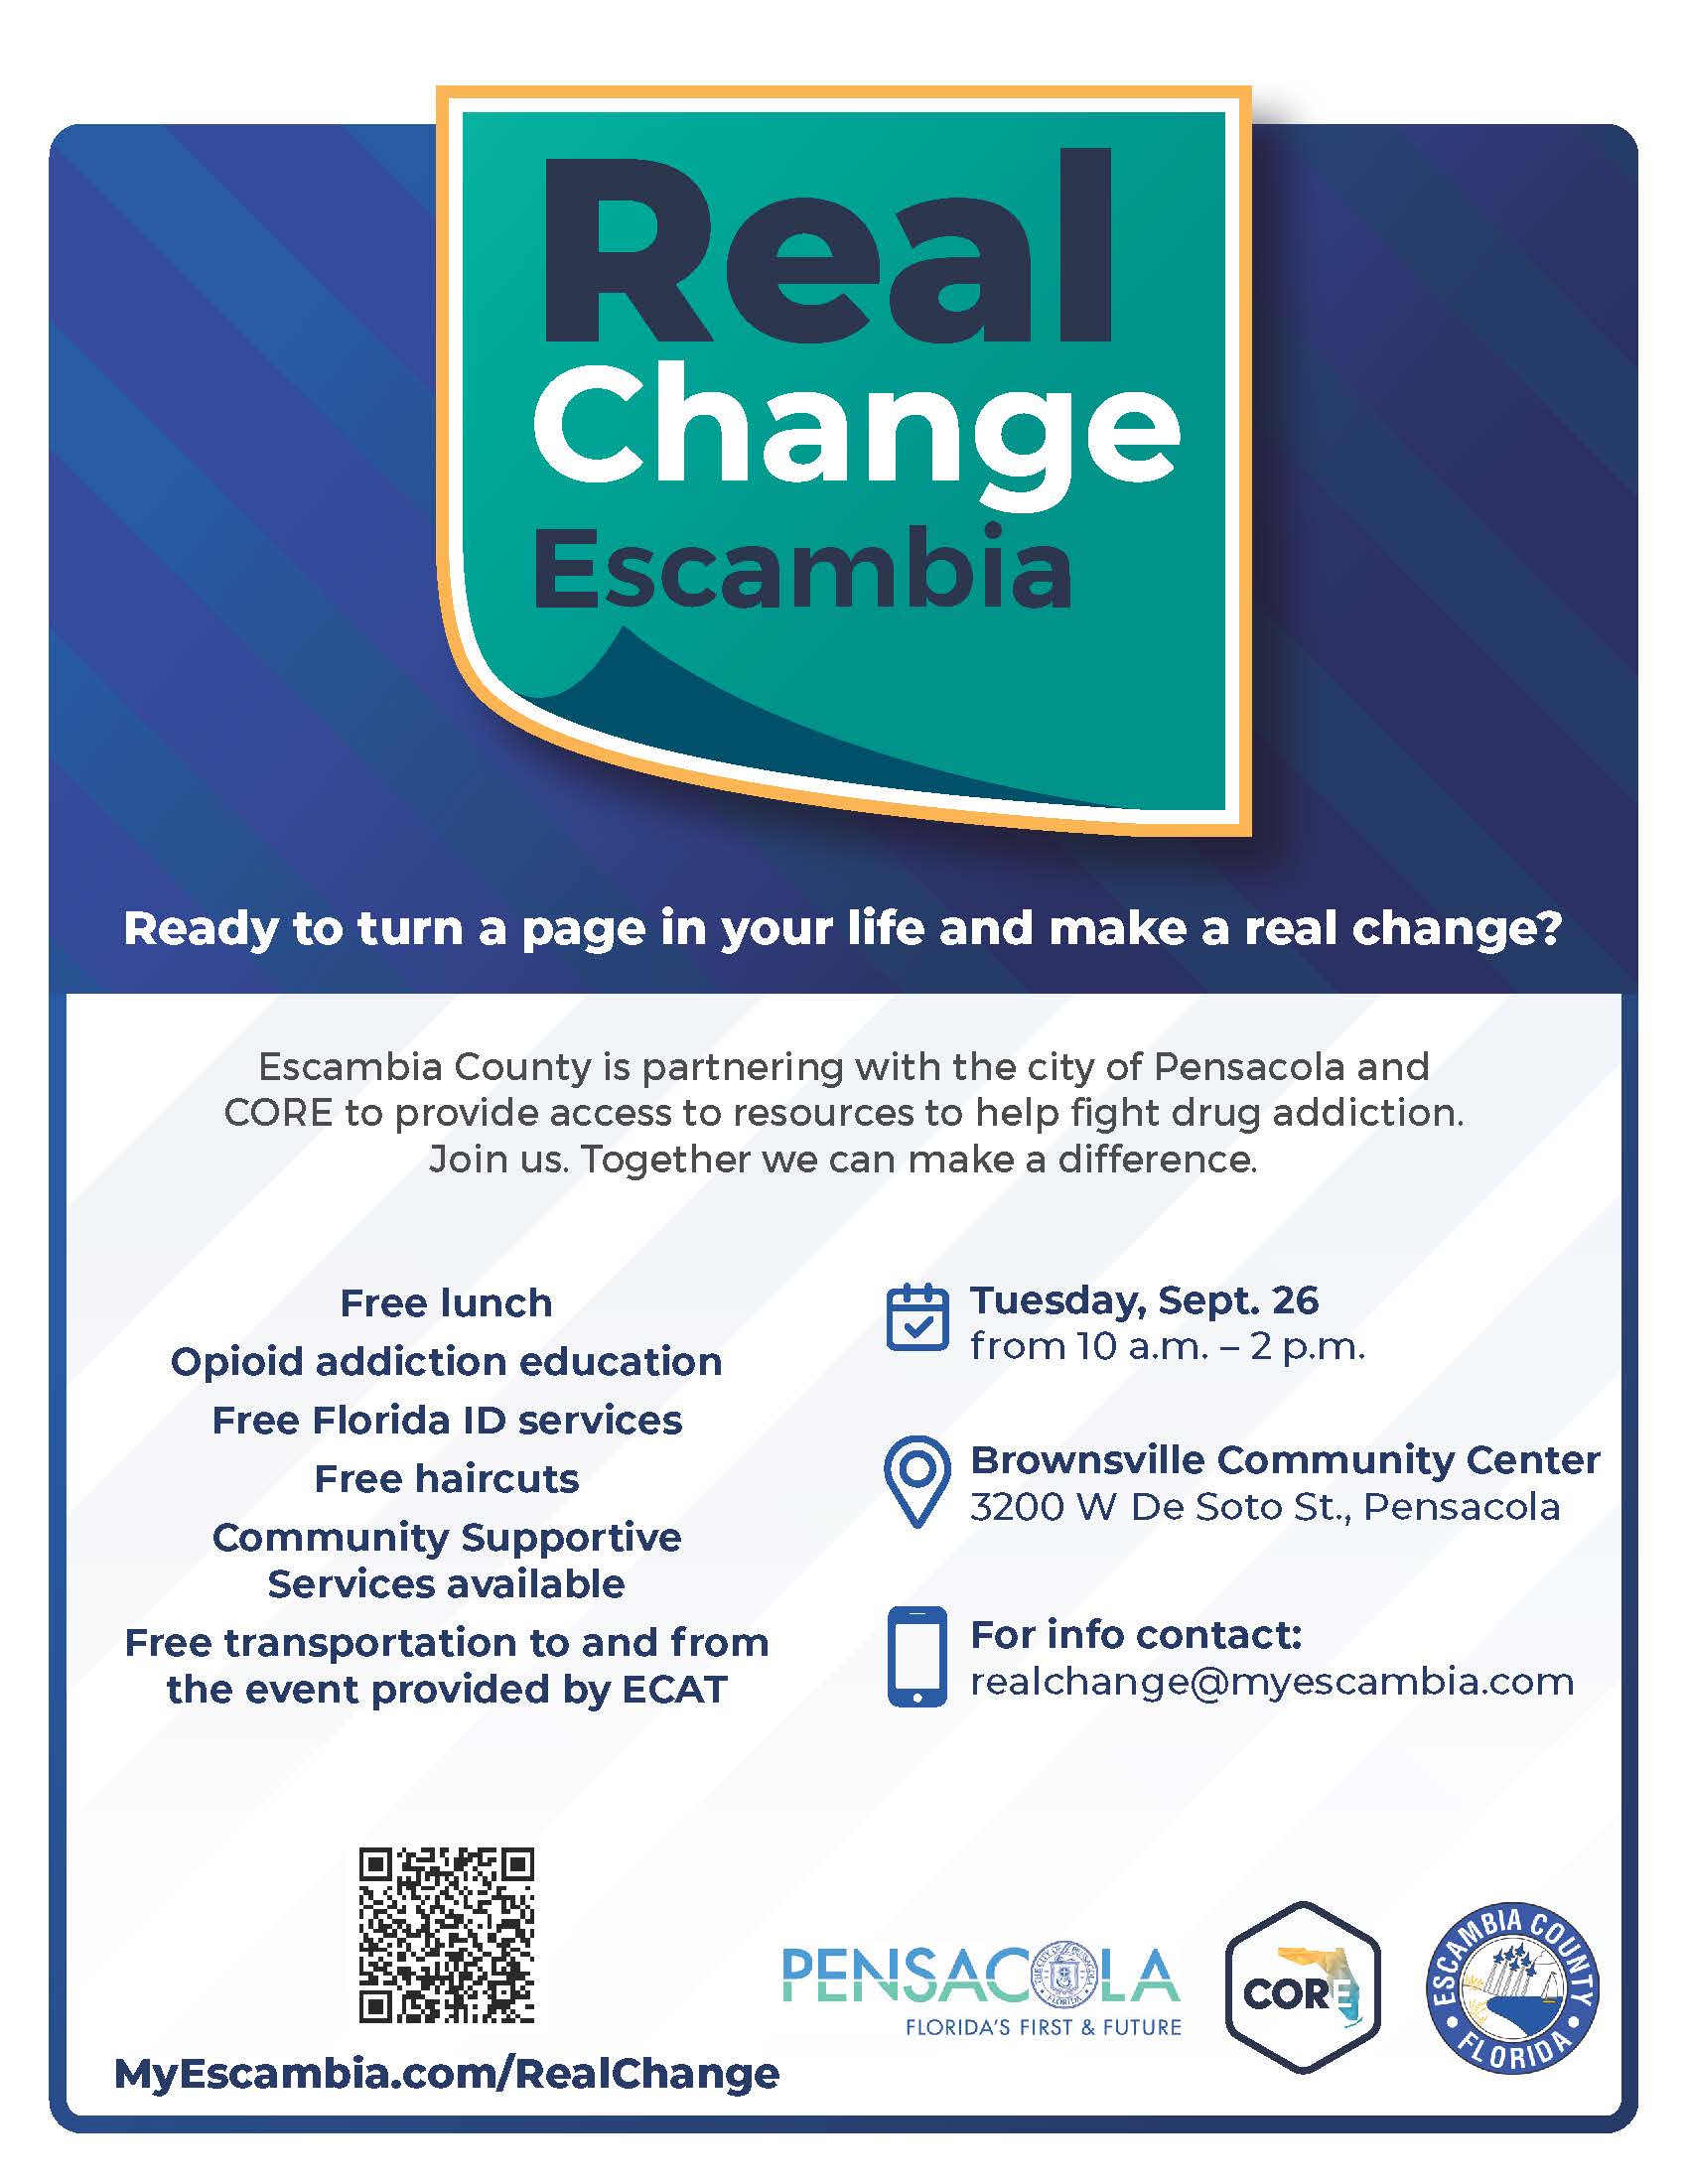 Real Change Escambia flyer